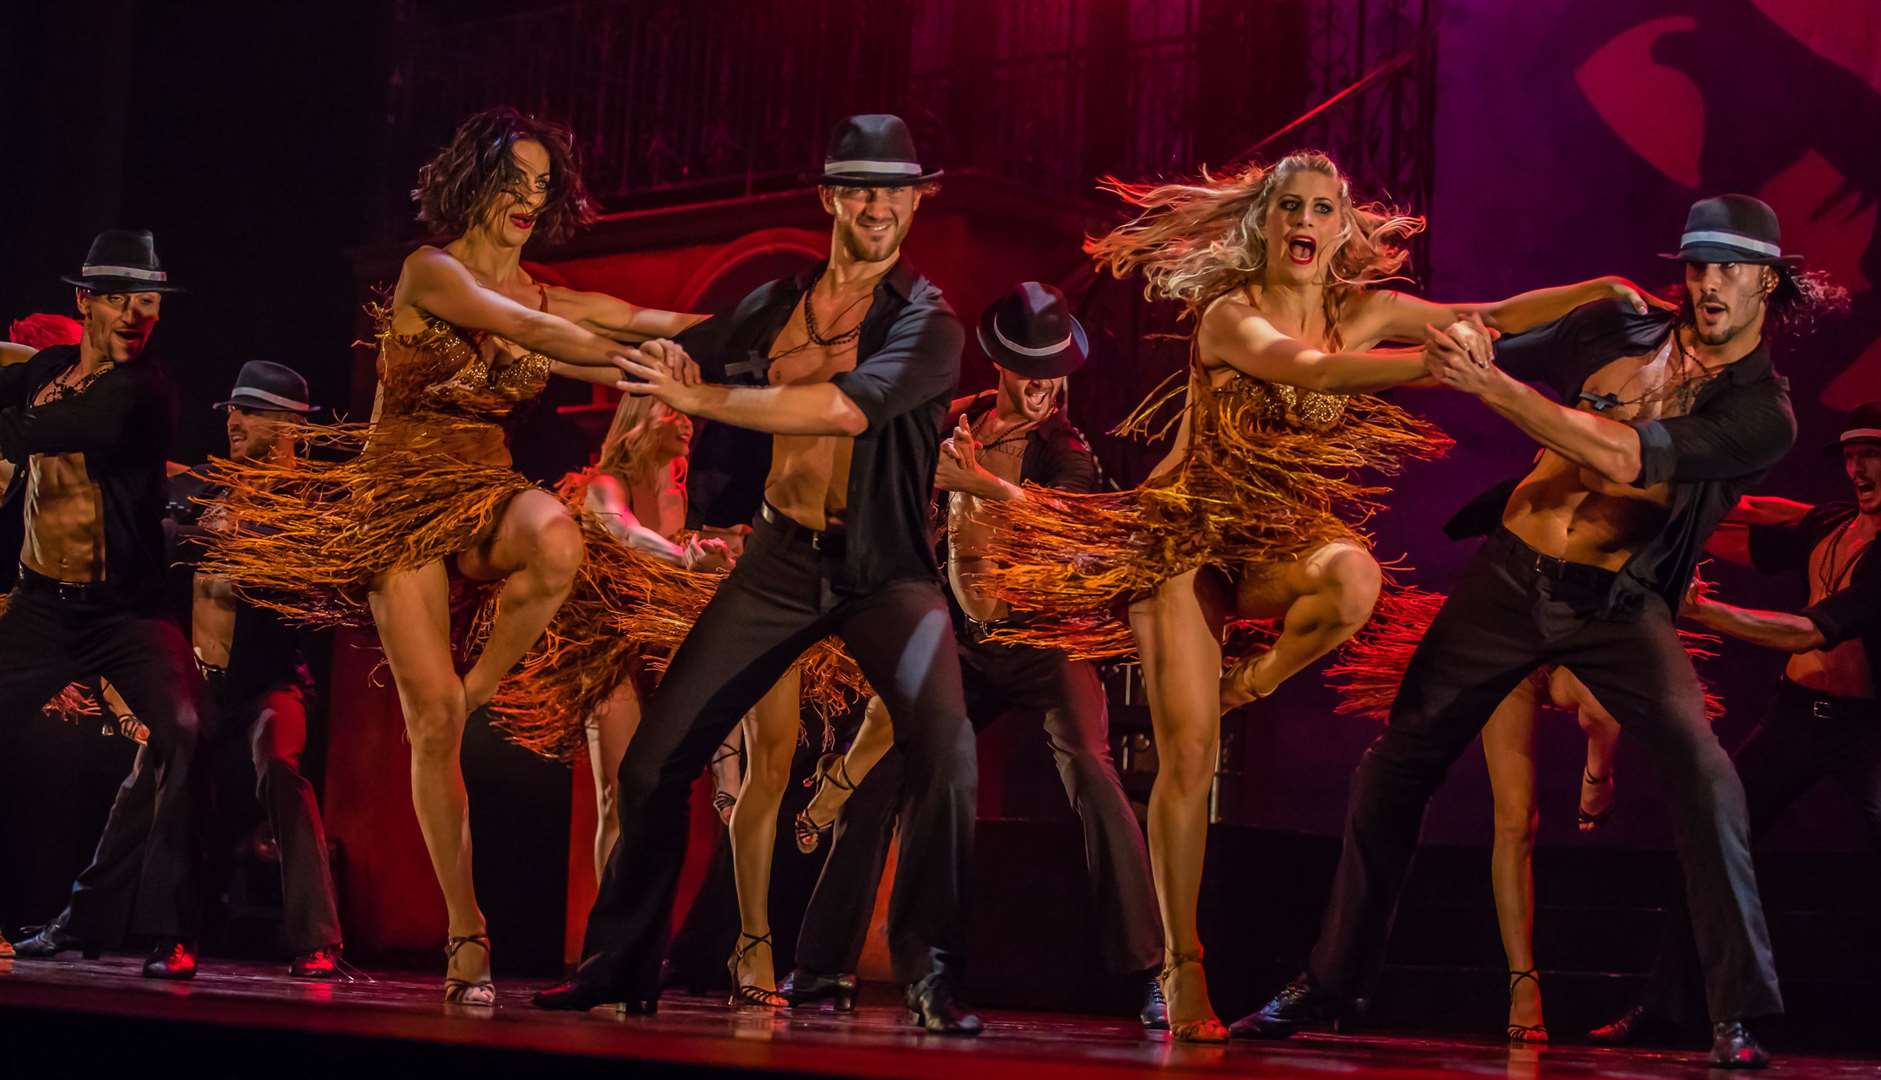 The Burn The Floor stage show features Strictly stars